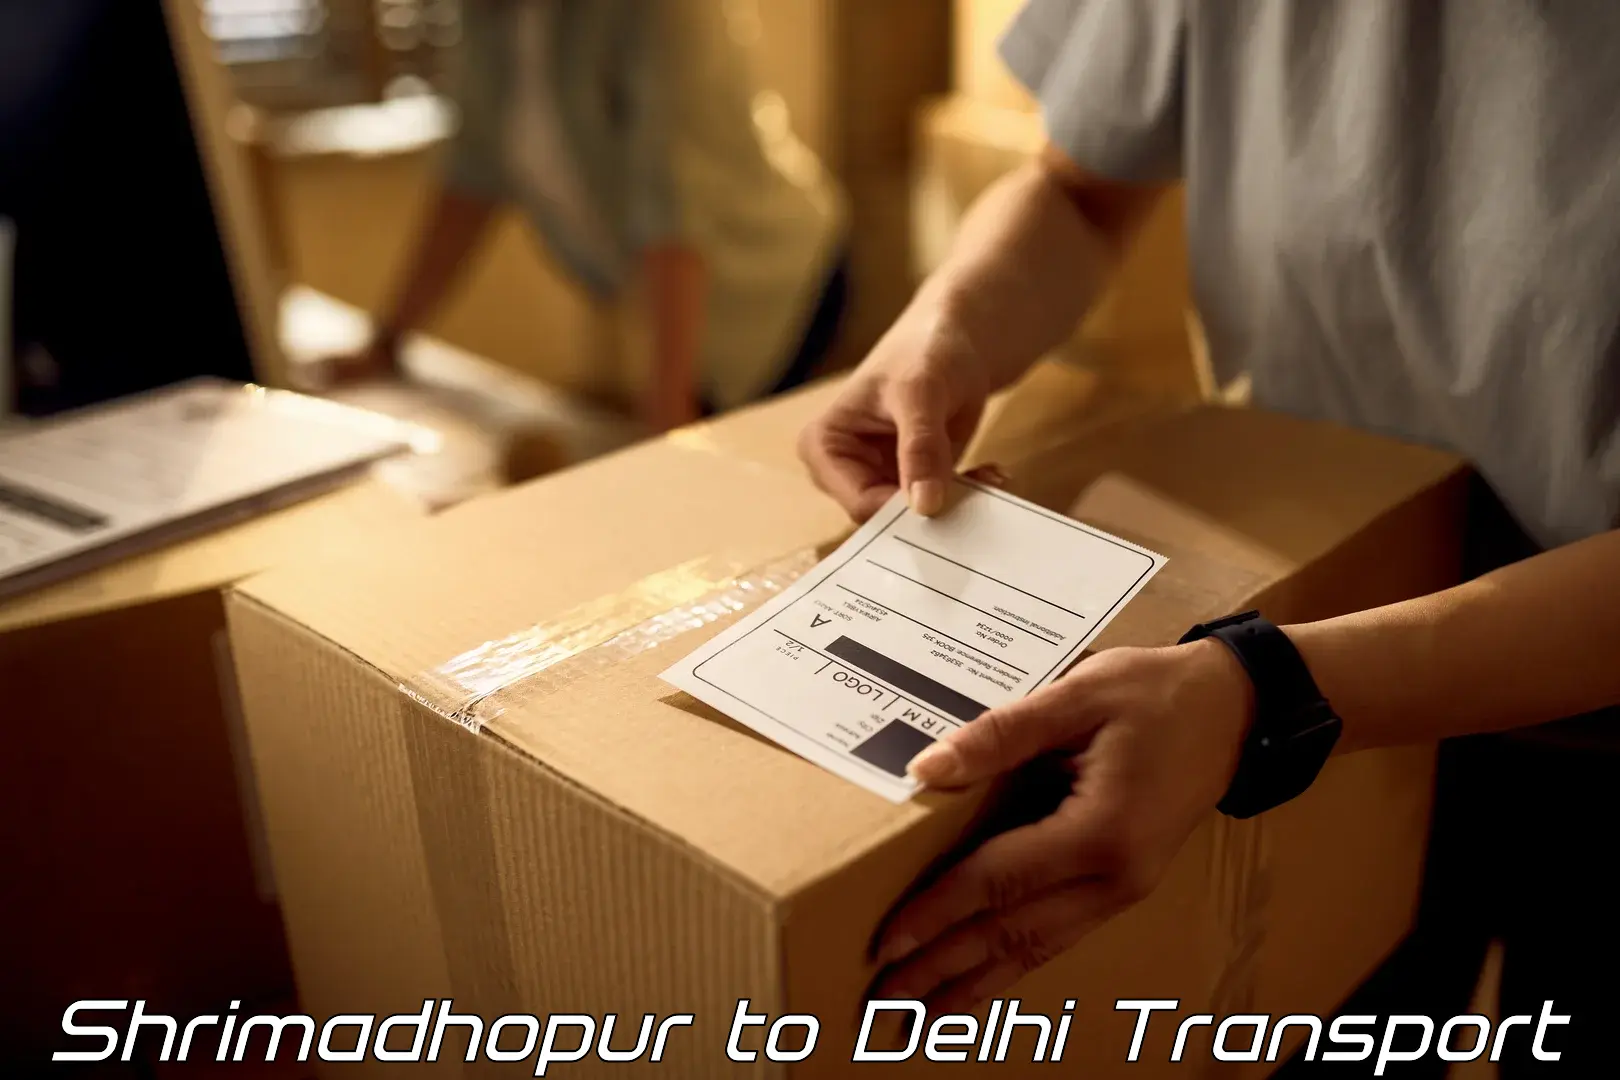 Nationwide transport services Shrimadhopur to NCR